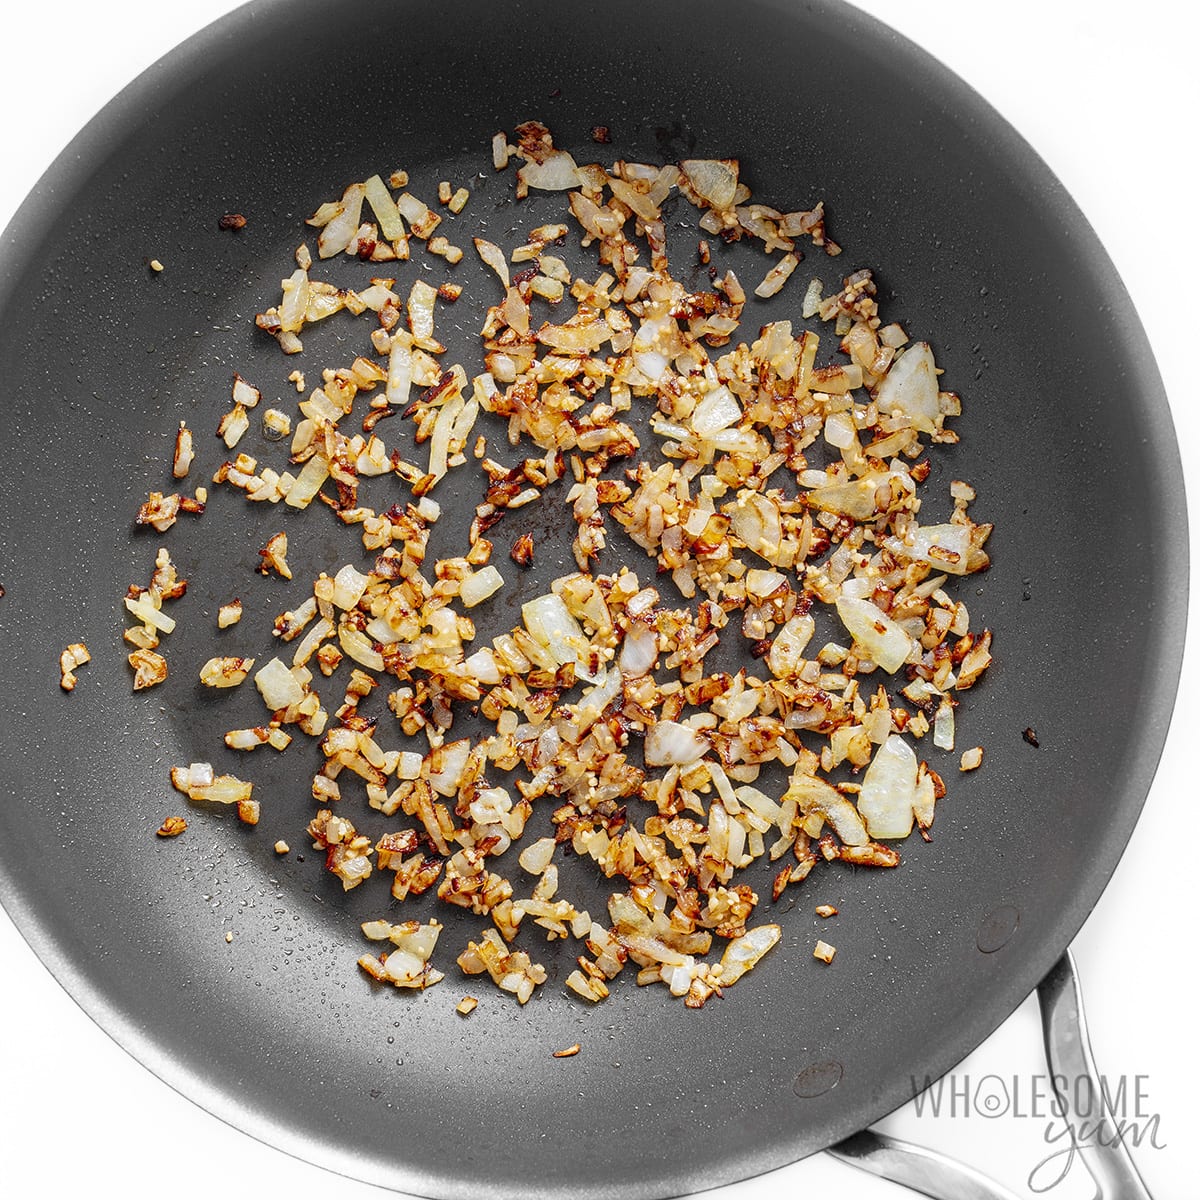 Sauteed onions in a skillet.